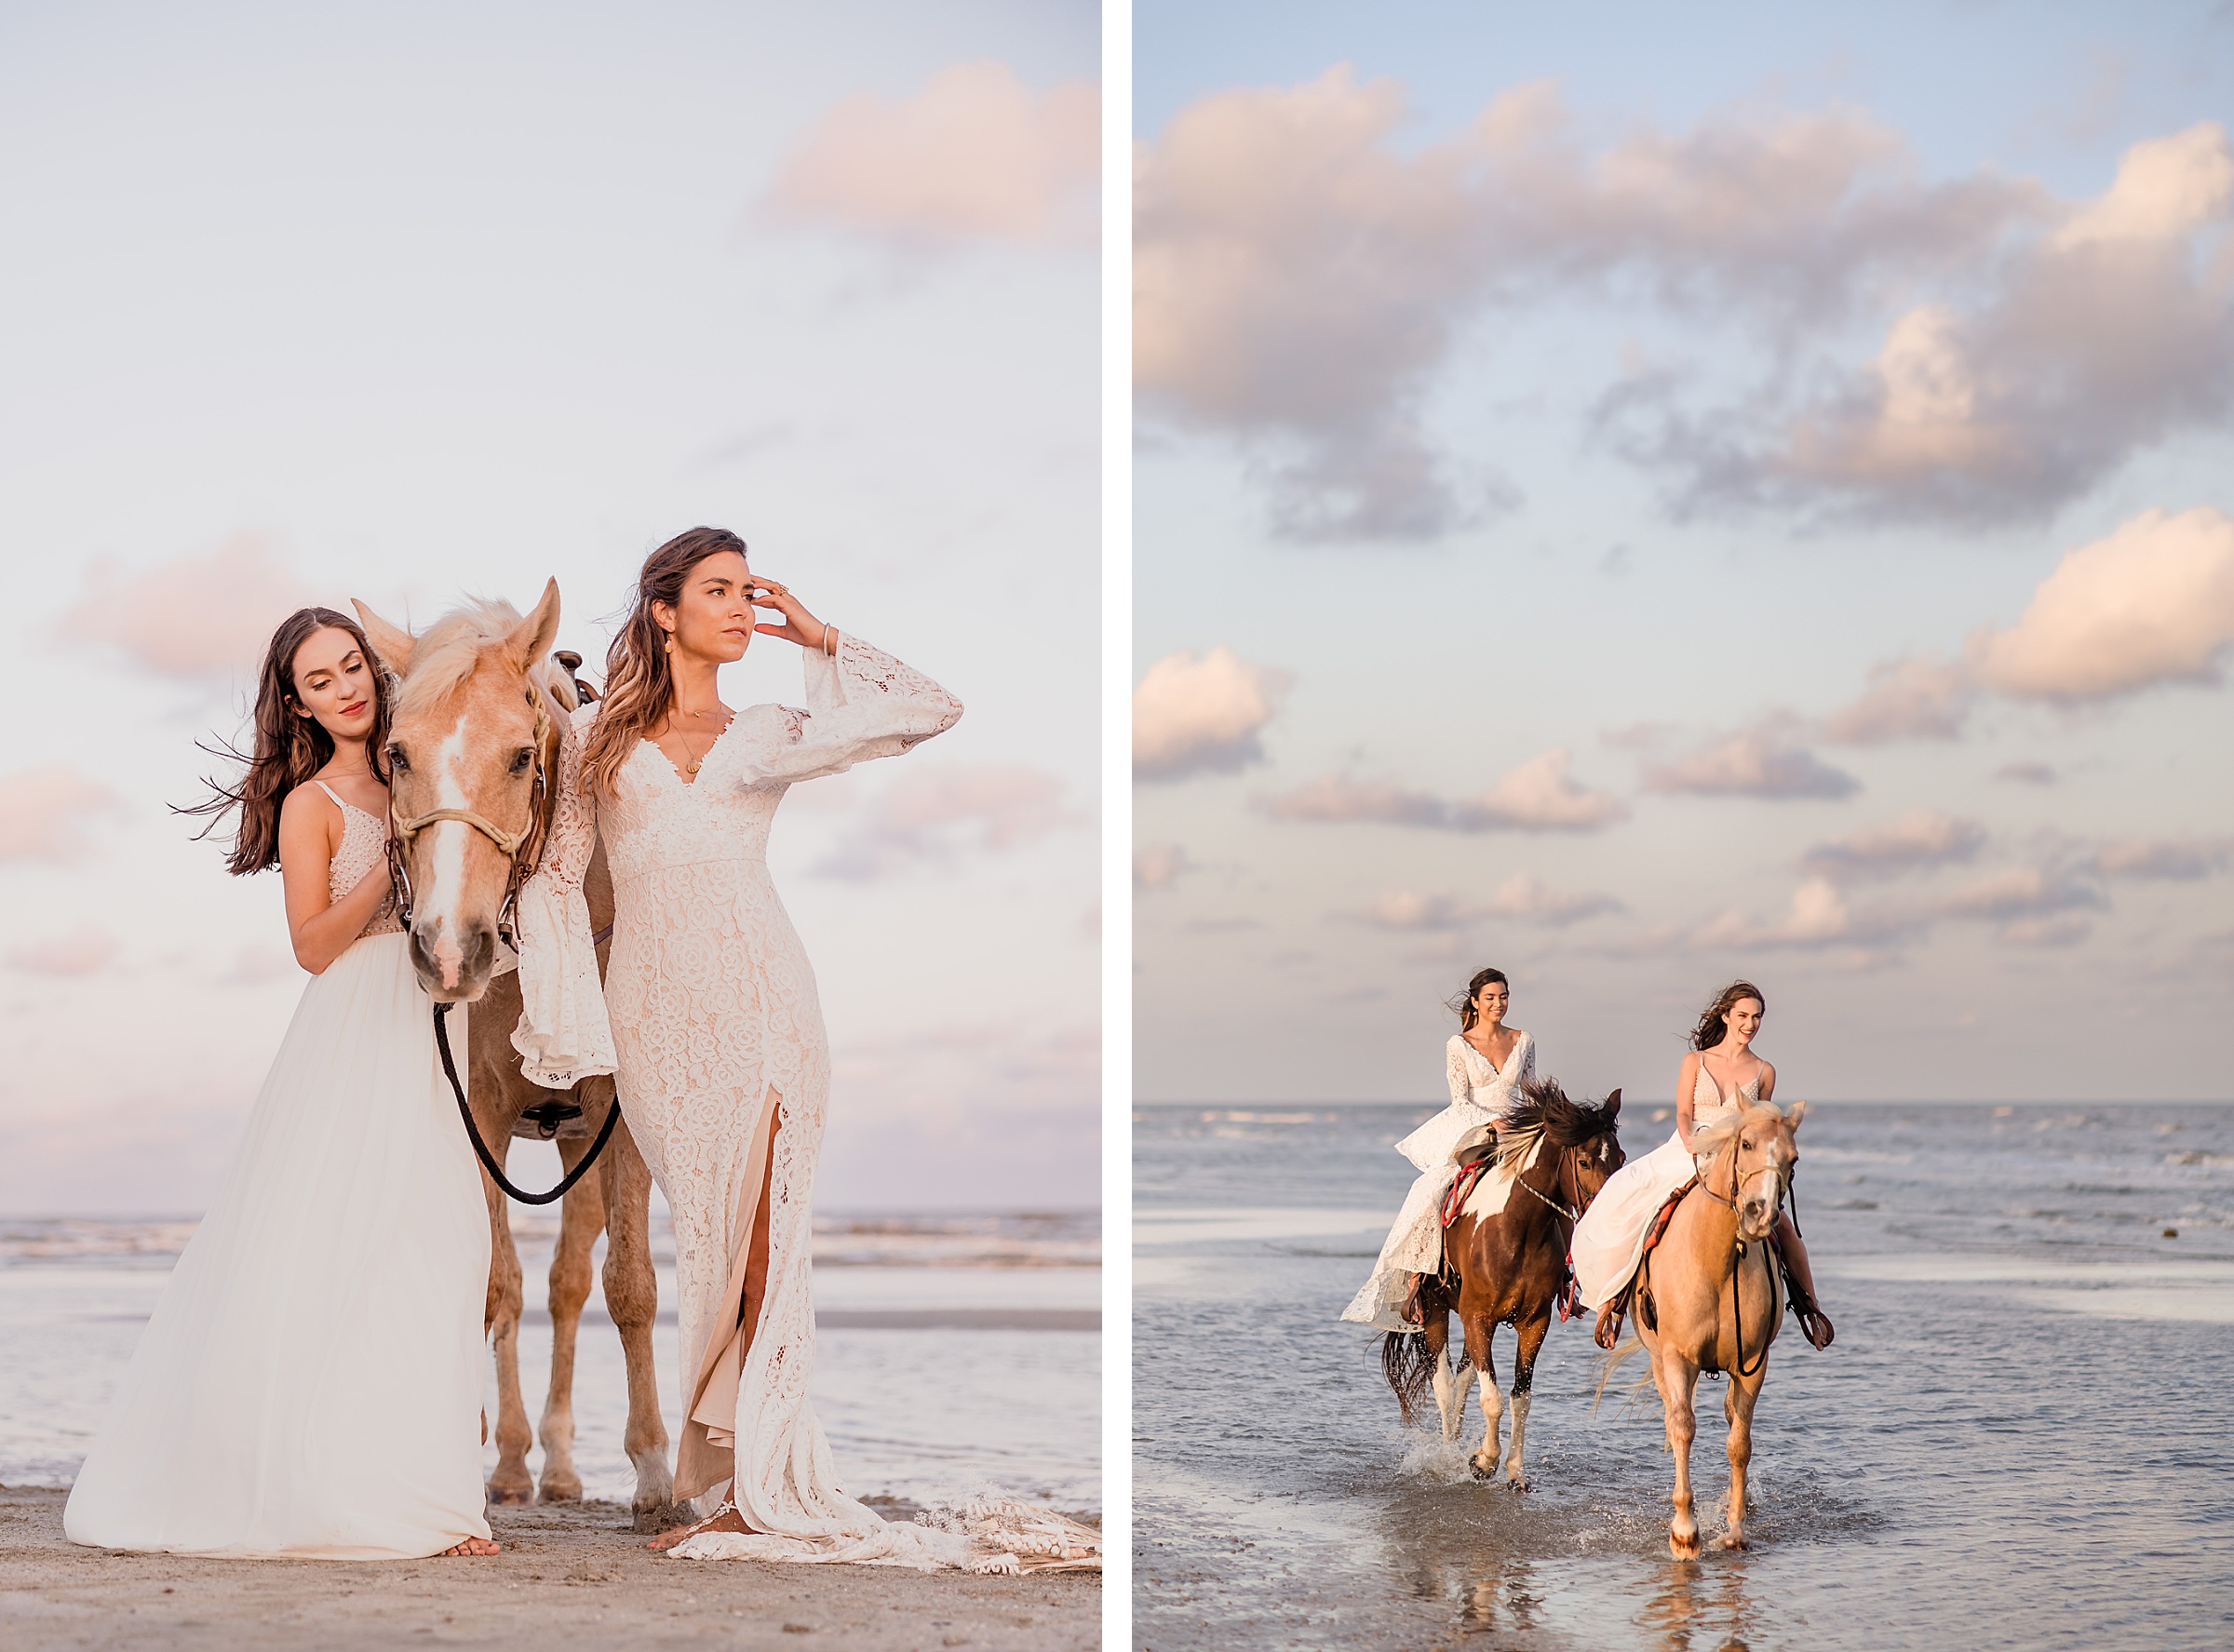 Bride portraits with their horses during an elopement in Galveston Beach, Texas